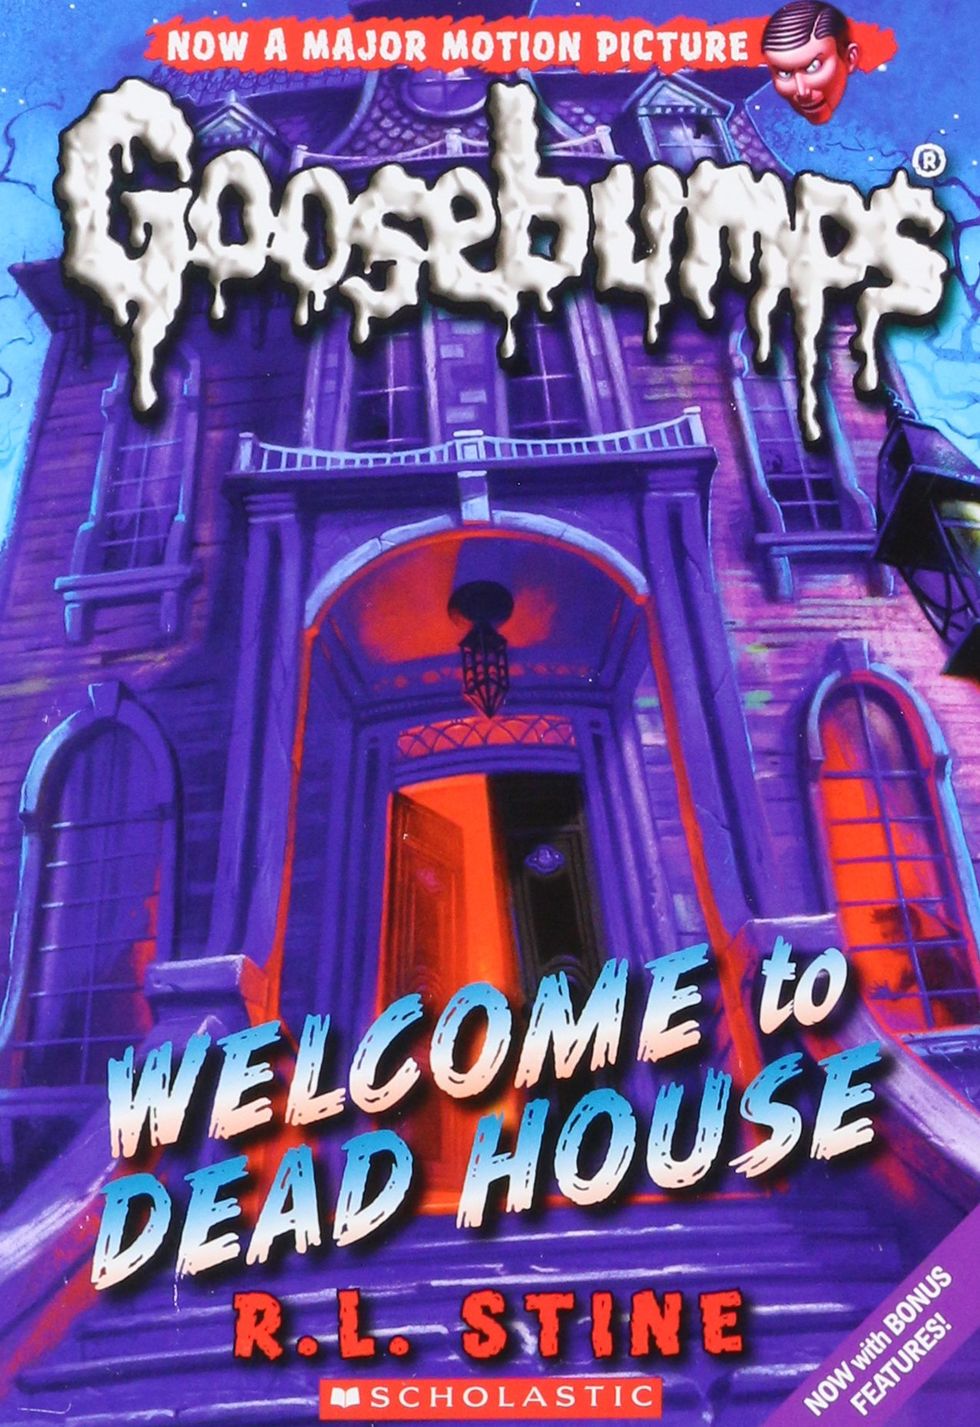 Welcome to Dead House (#1)